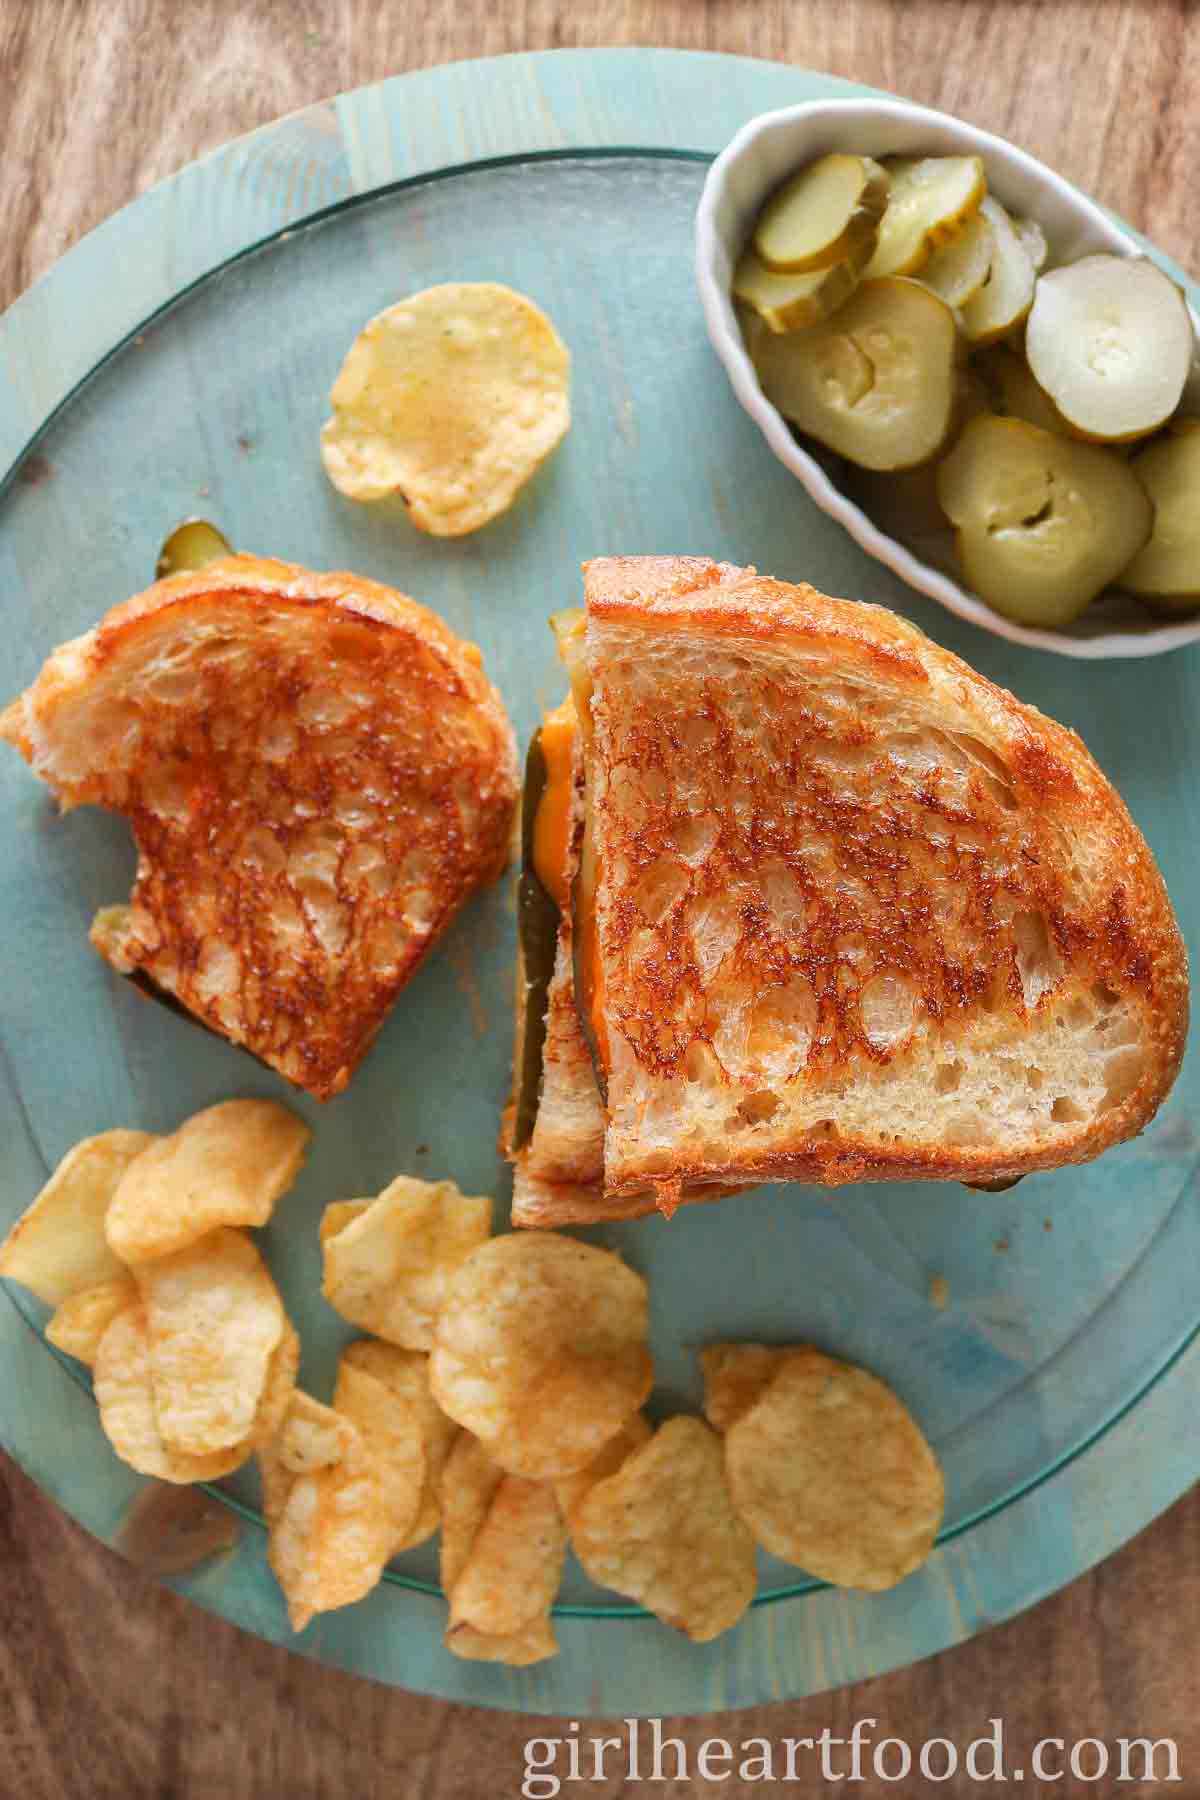 Overhead shot of grilled cheese sandwich halves, potato chips and a dish of sliced pickle.